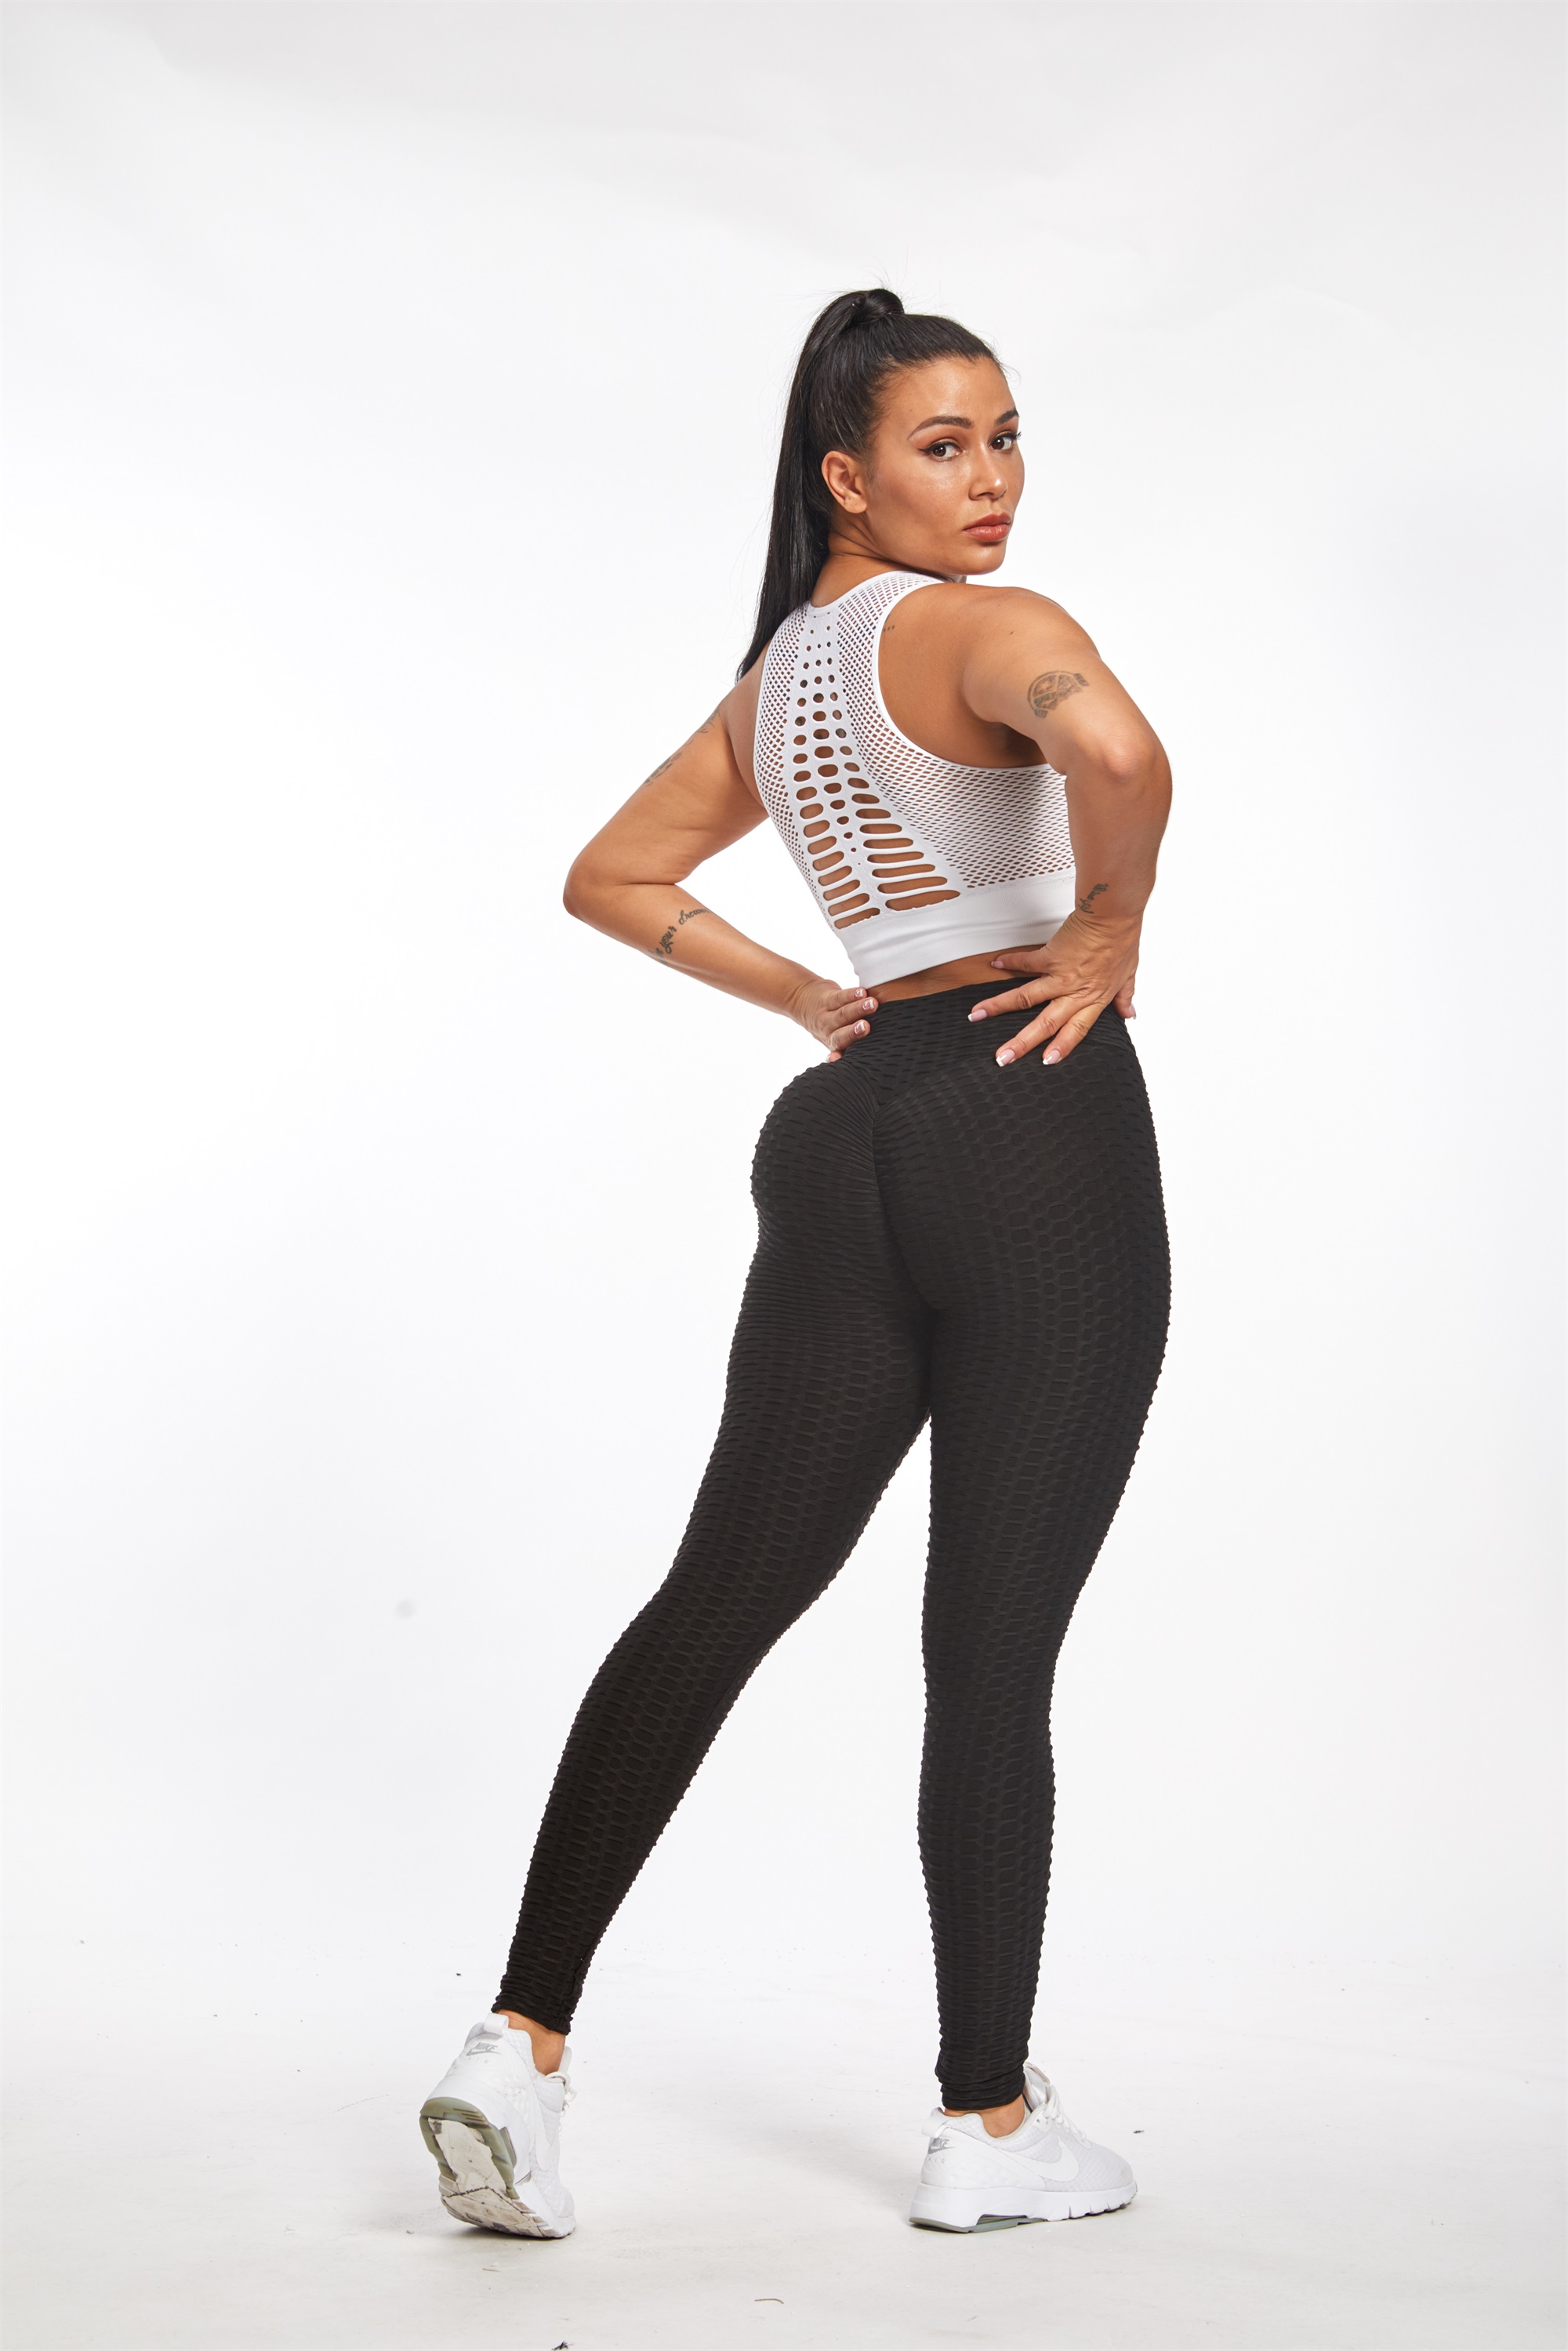 Women's Thick High Waist Yoga Exercise Stretch Stretch Pants Tummy Control Slimming Lifting Anti Cellulite Scrunch Booty Leggings Ruched Butt Textured Tights Sport Workout - image 4 of 9